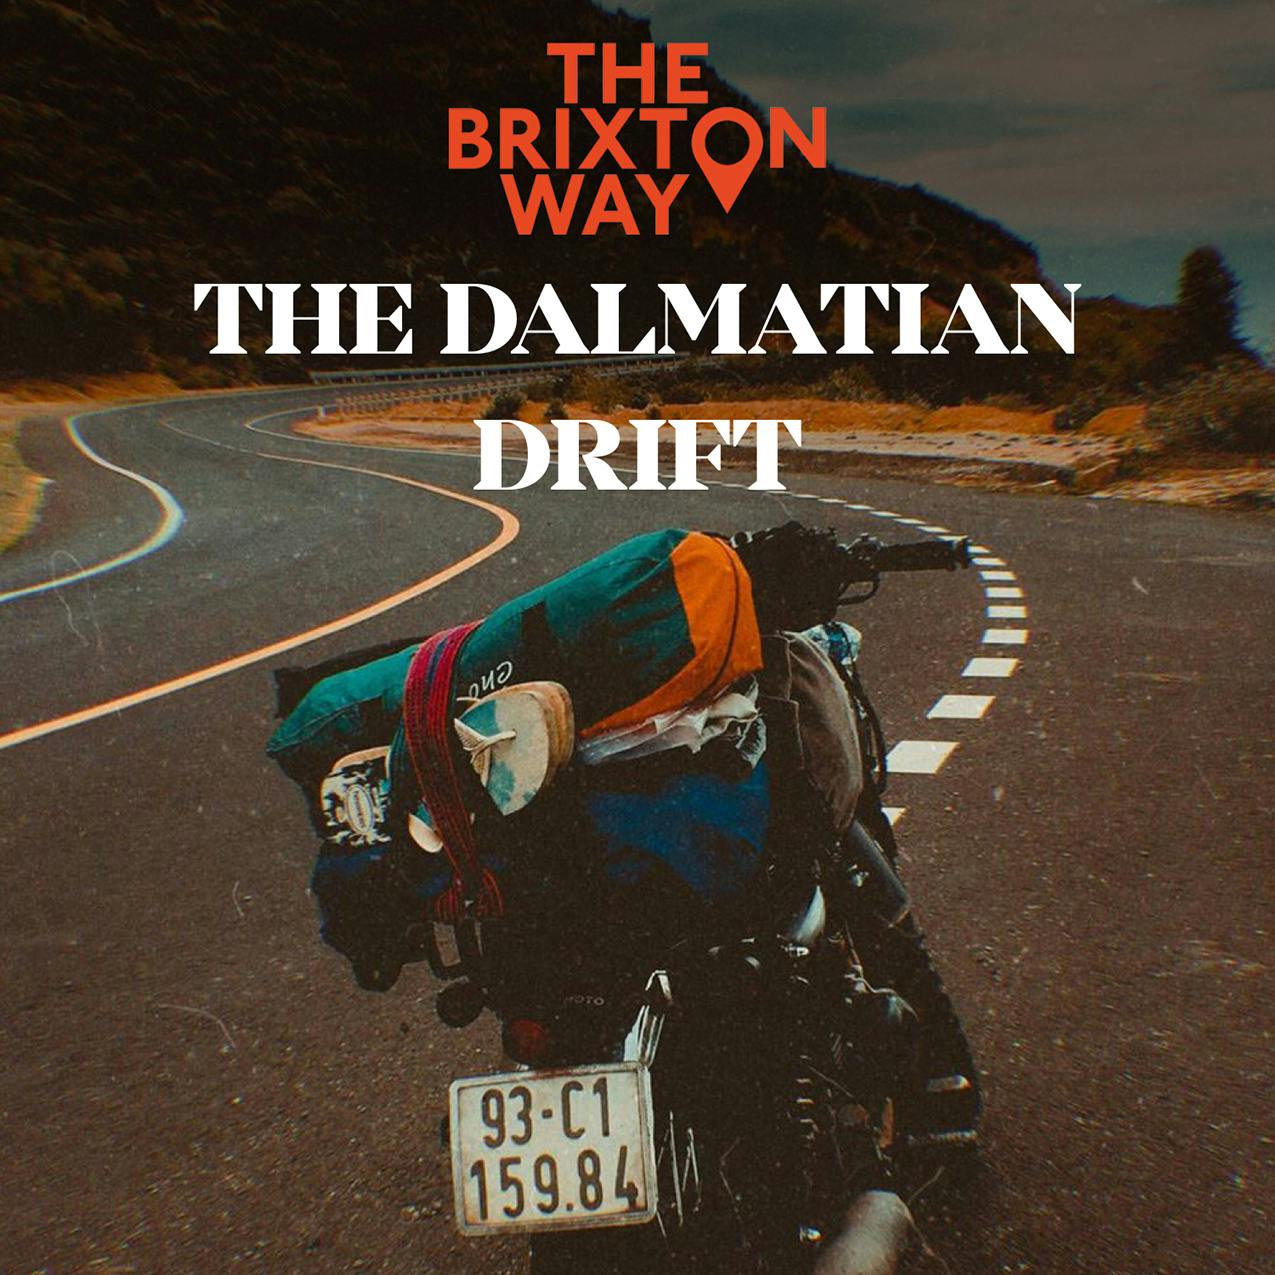 Recommended Ride: The Dalmatian Drift